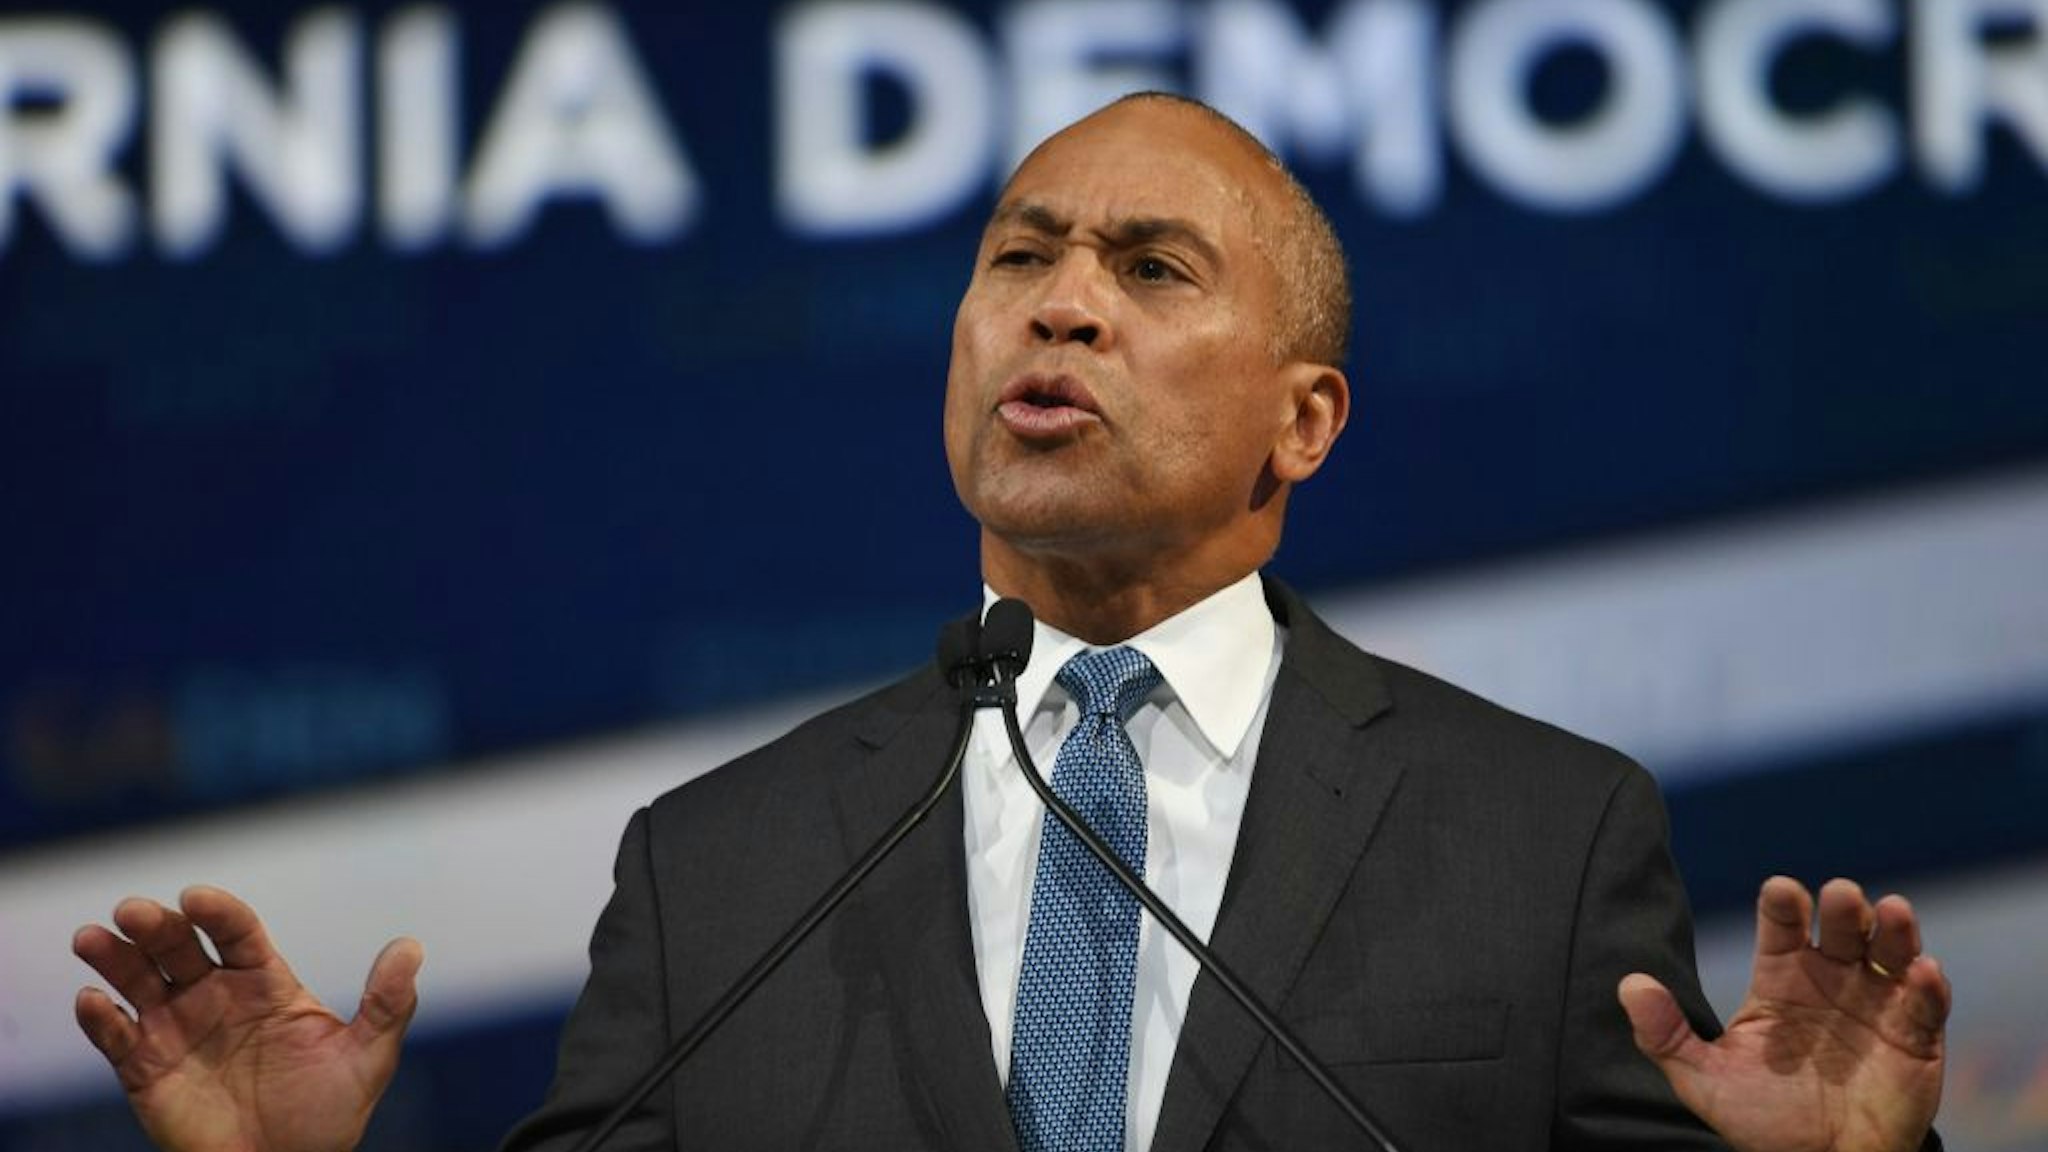 Deval Patrick speaks as he kicks off his presidential campaign at the California Democratic Party